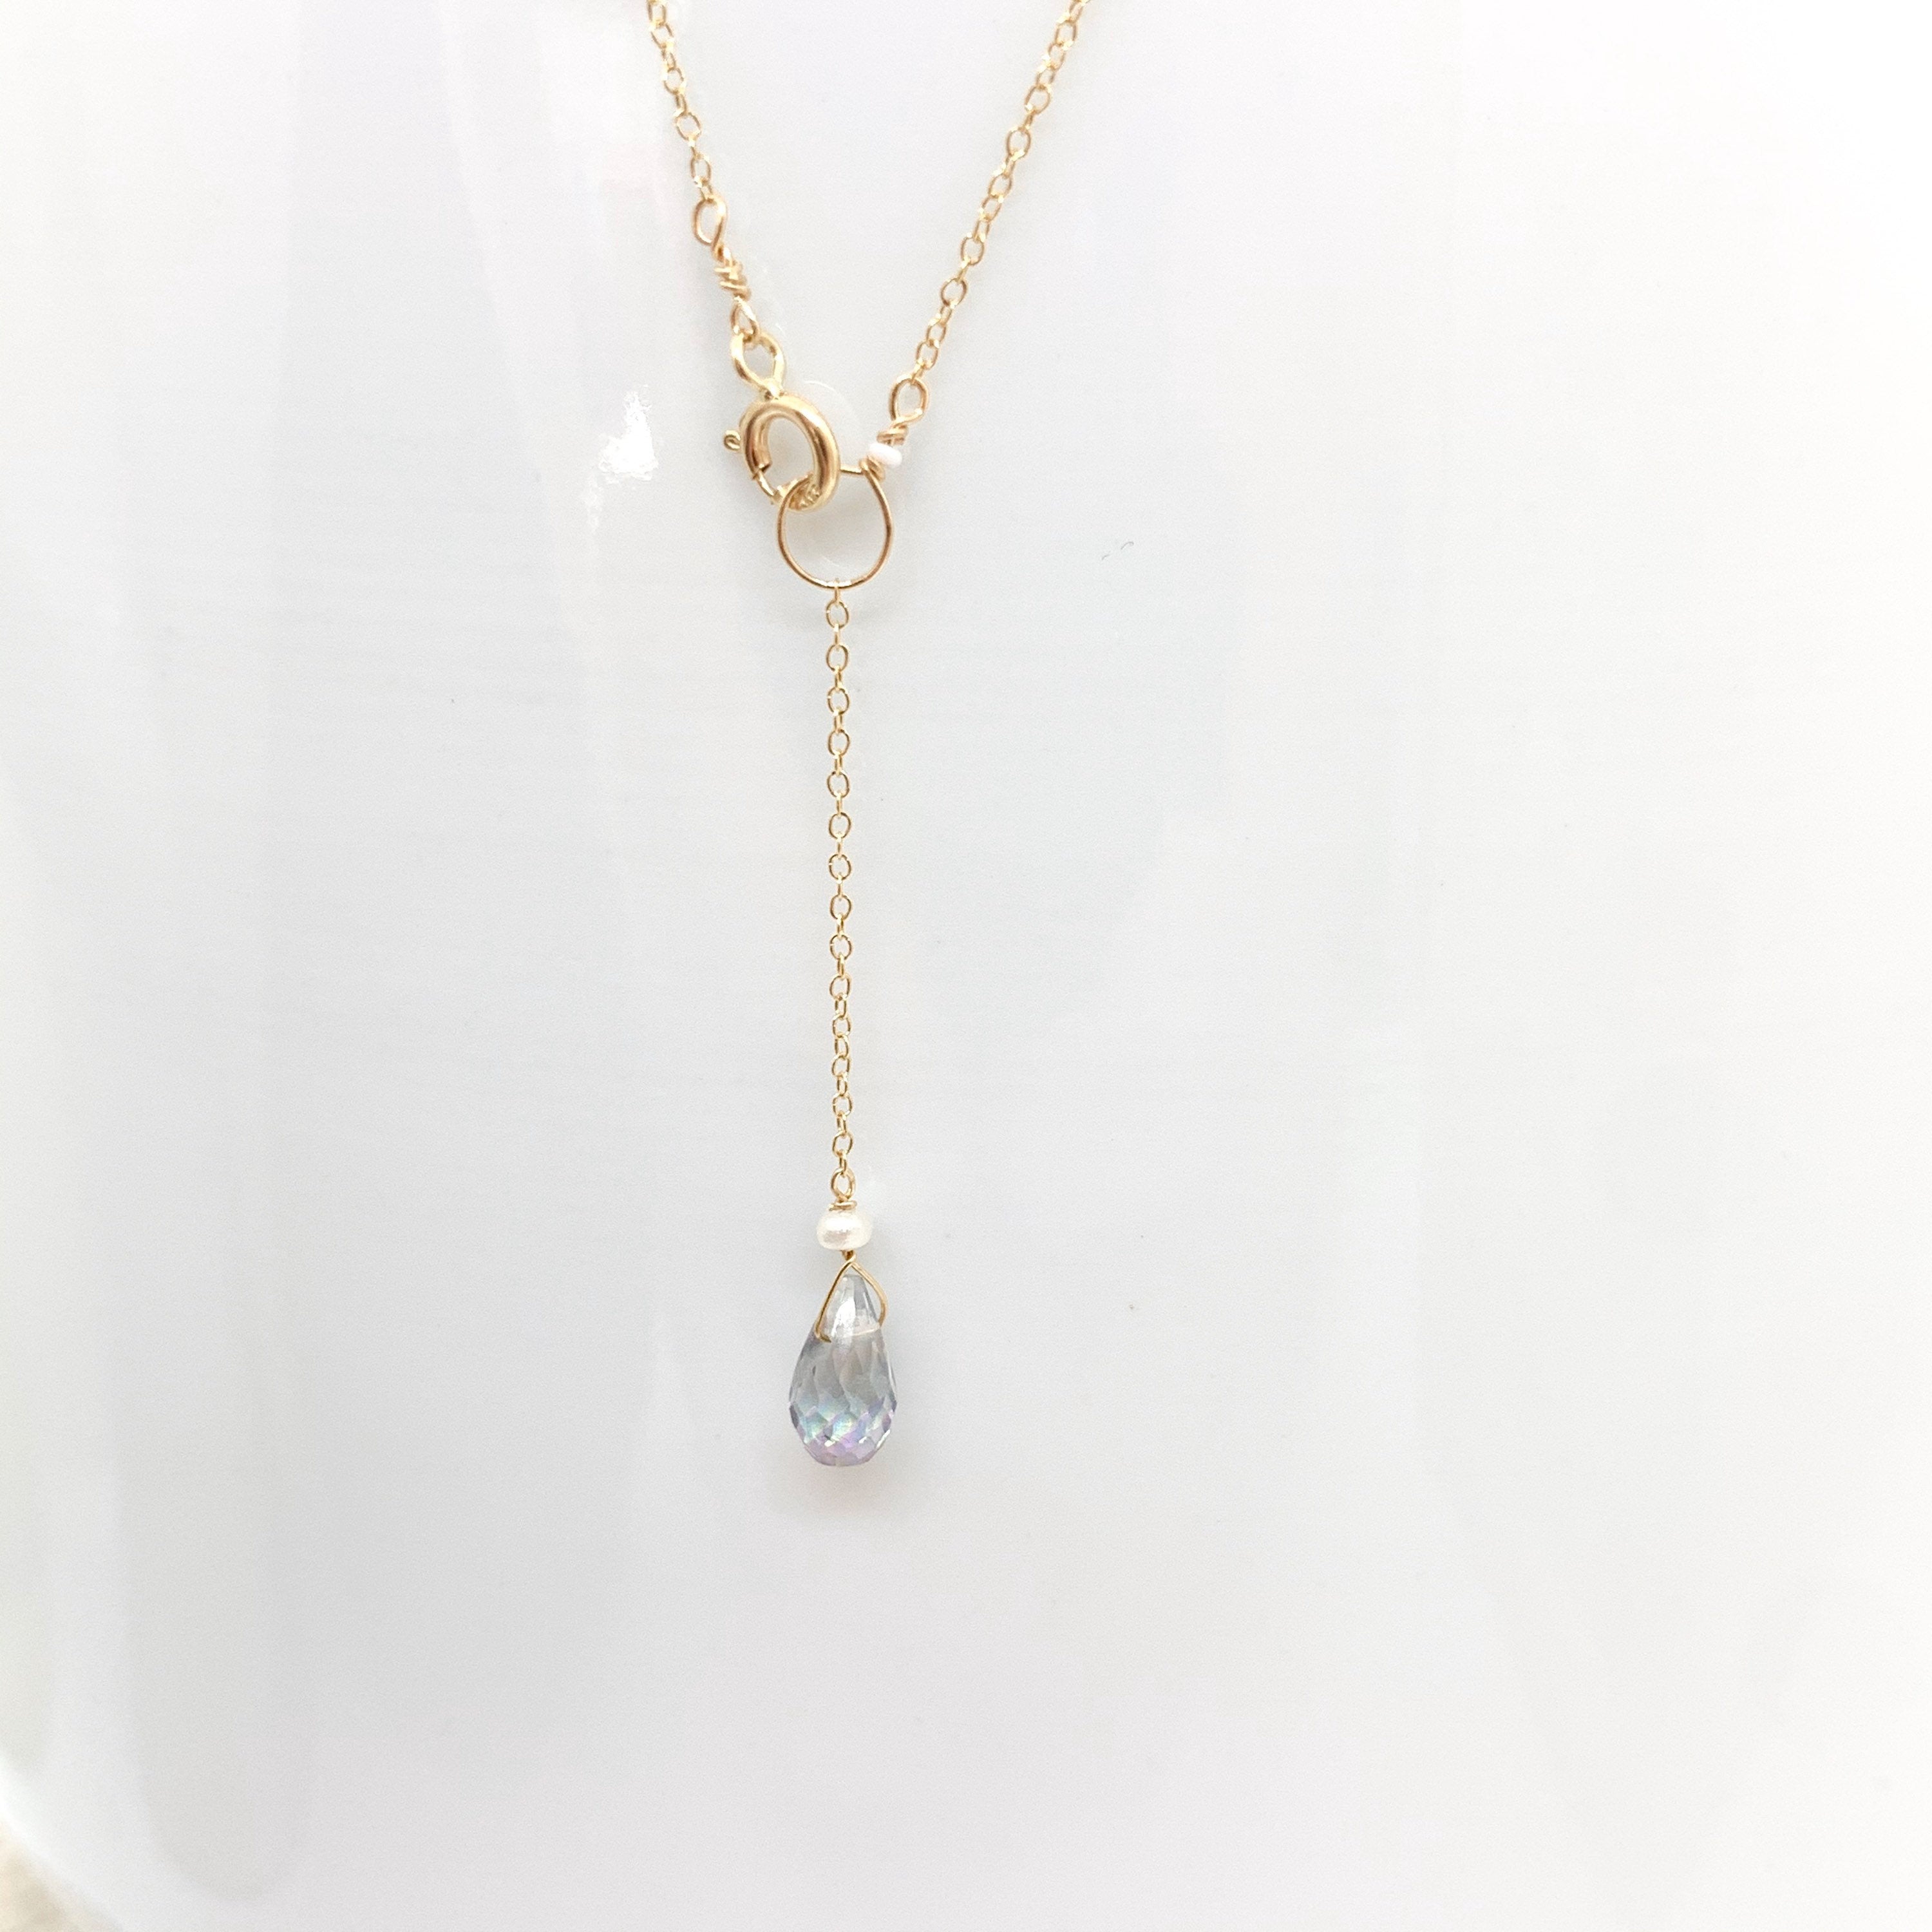 14k Yellow Gold Chain Necklace w/ Mystic Topaz & Freshwater Pearls